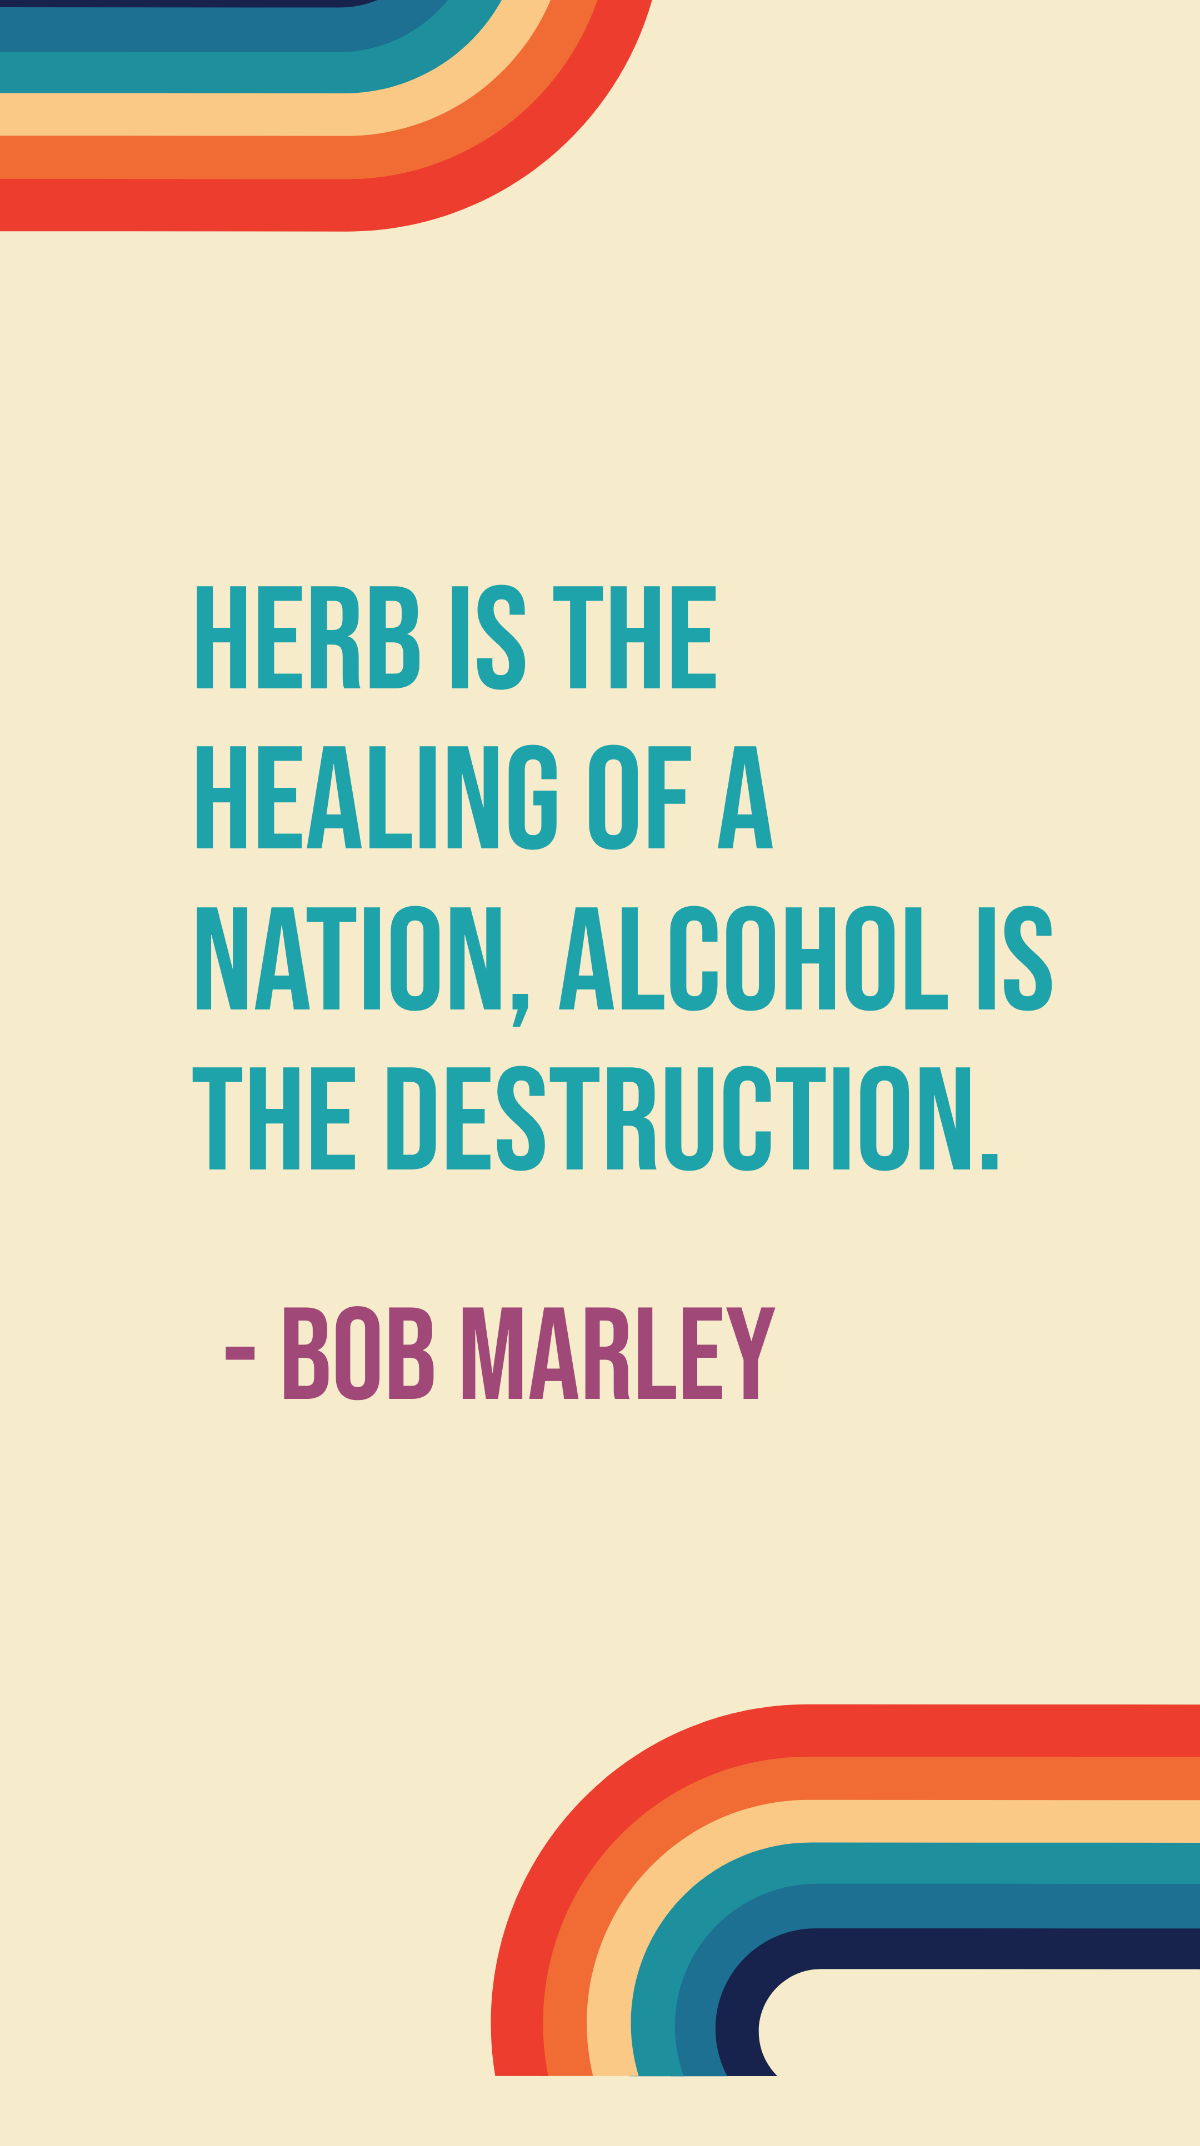 Free Bob Marley - Herb is the healing of a nation, alcohol is the destruction. Template